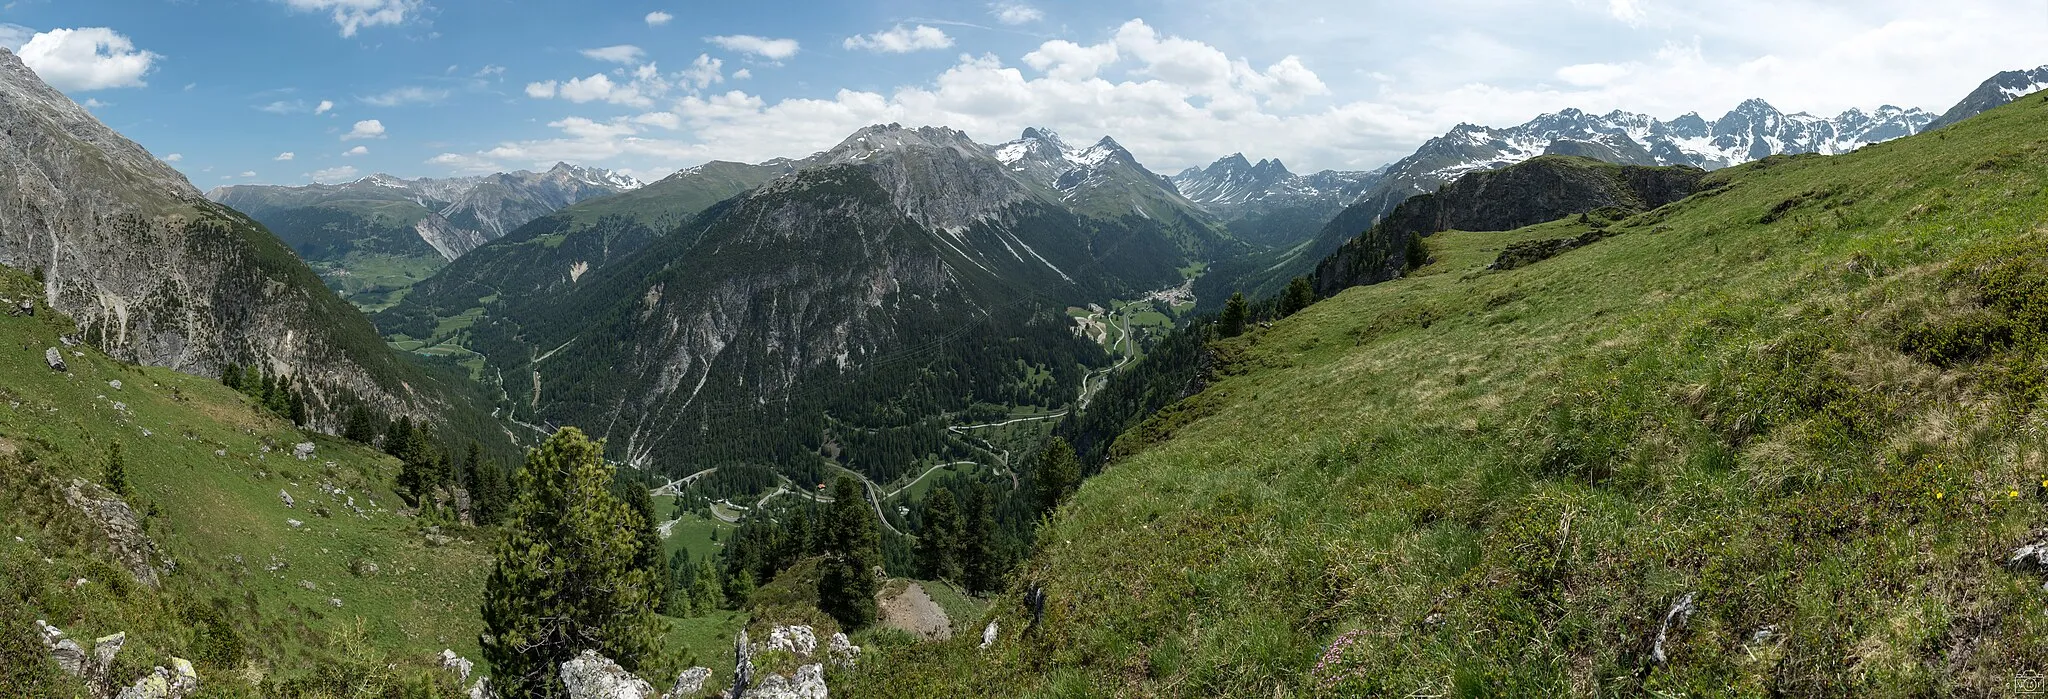 Photo showing: View of the Albula Railway between Bergün and Preda, part of the UNESCO world heritage.
Well shown the sinuous, winding line, which nearly doubles the length of the railroad compared to the linear distance for the decrease of the gradient.